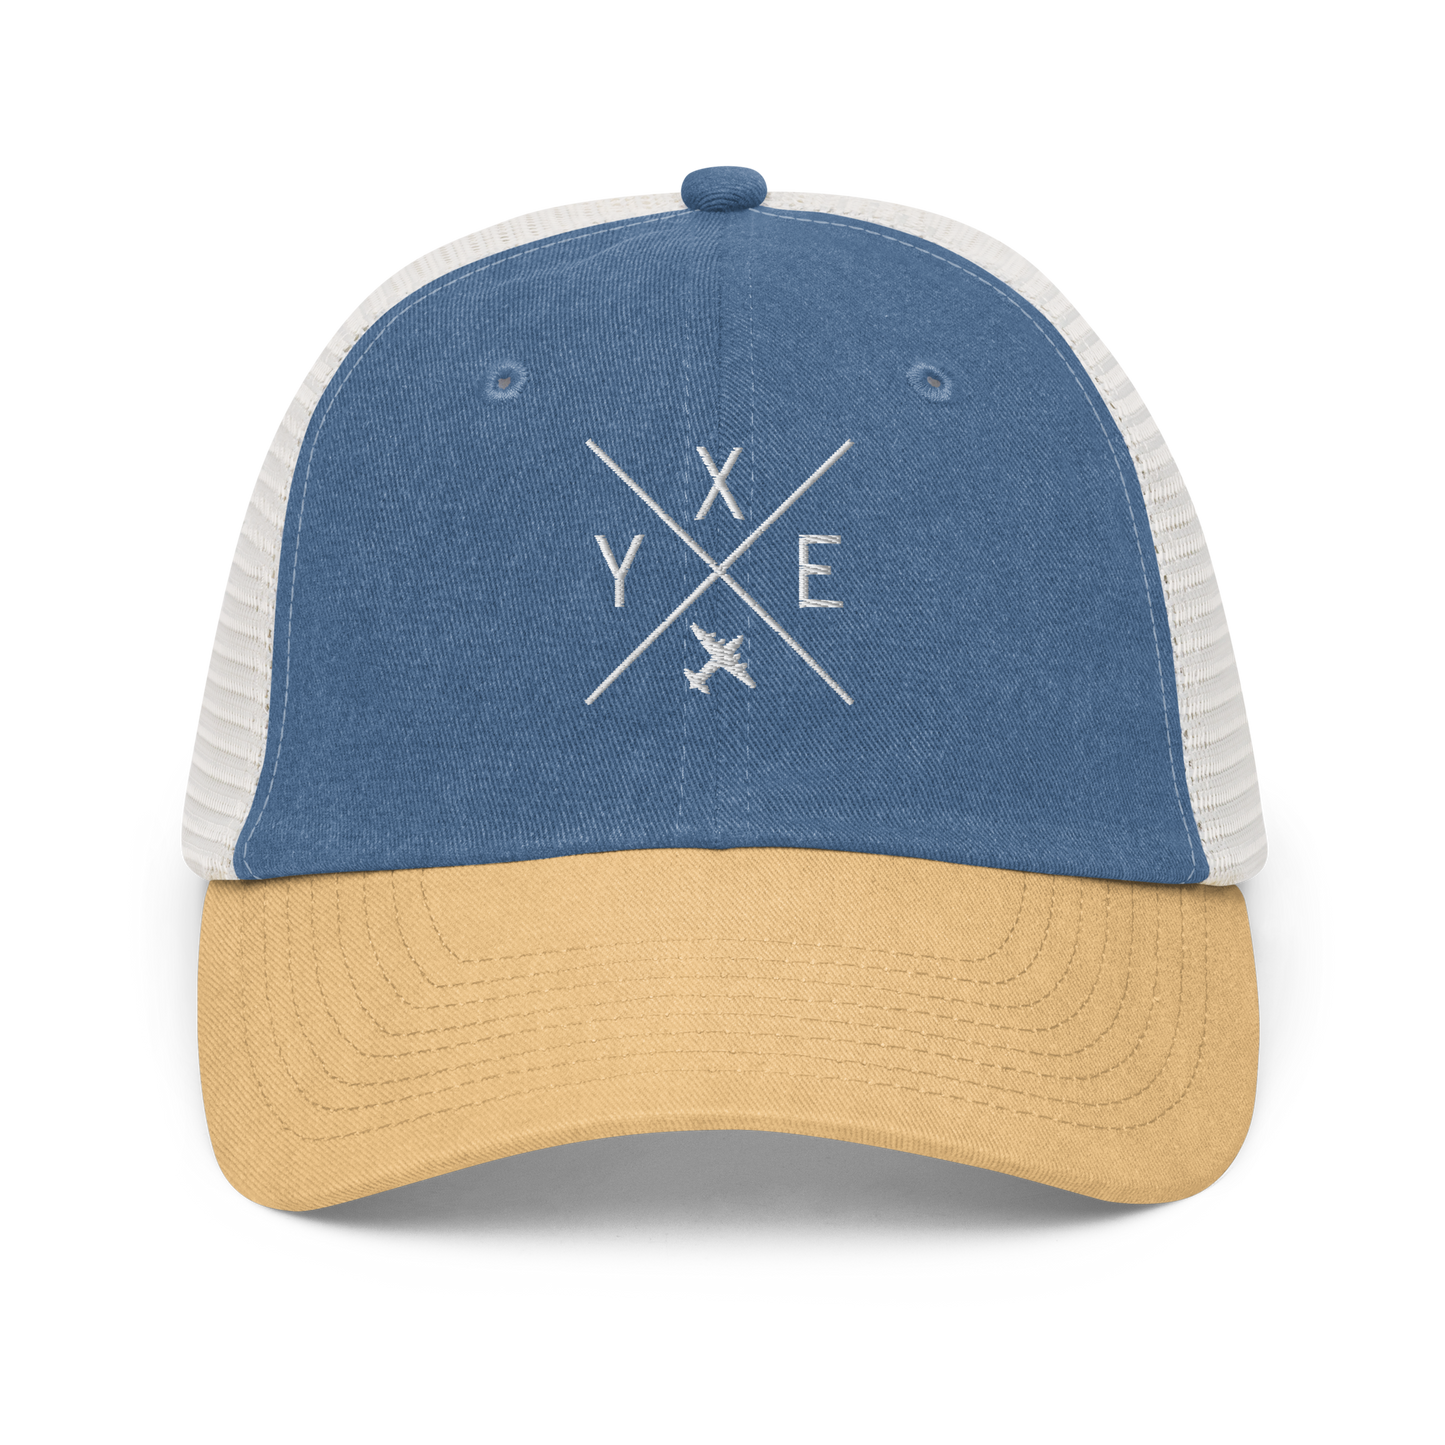 YHM Designs - YXE Saskatoon Pigment-Dyed Trucker Cap - Crossed-X Design with Airport Code and Vintage Propliner - White Embroidery - Image 01